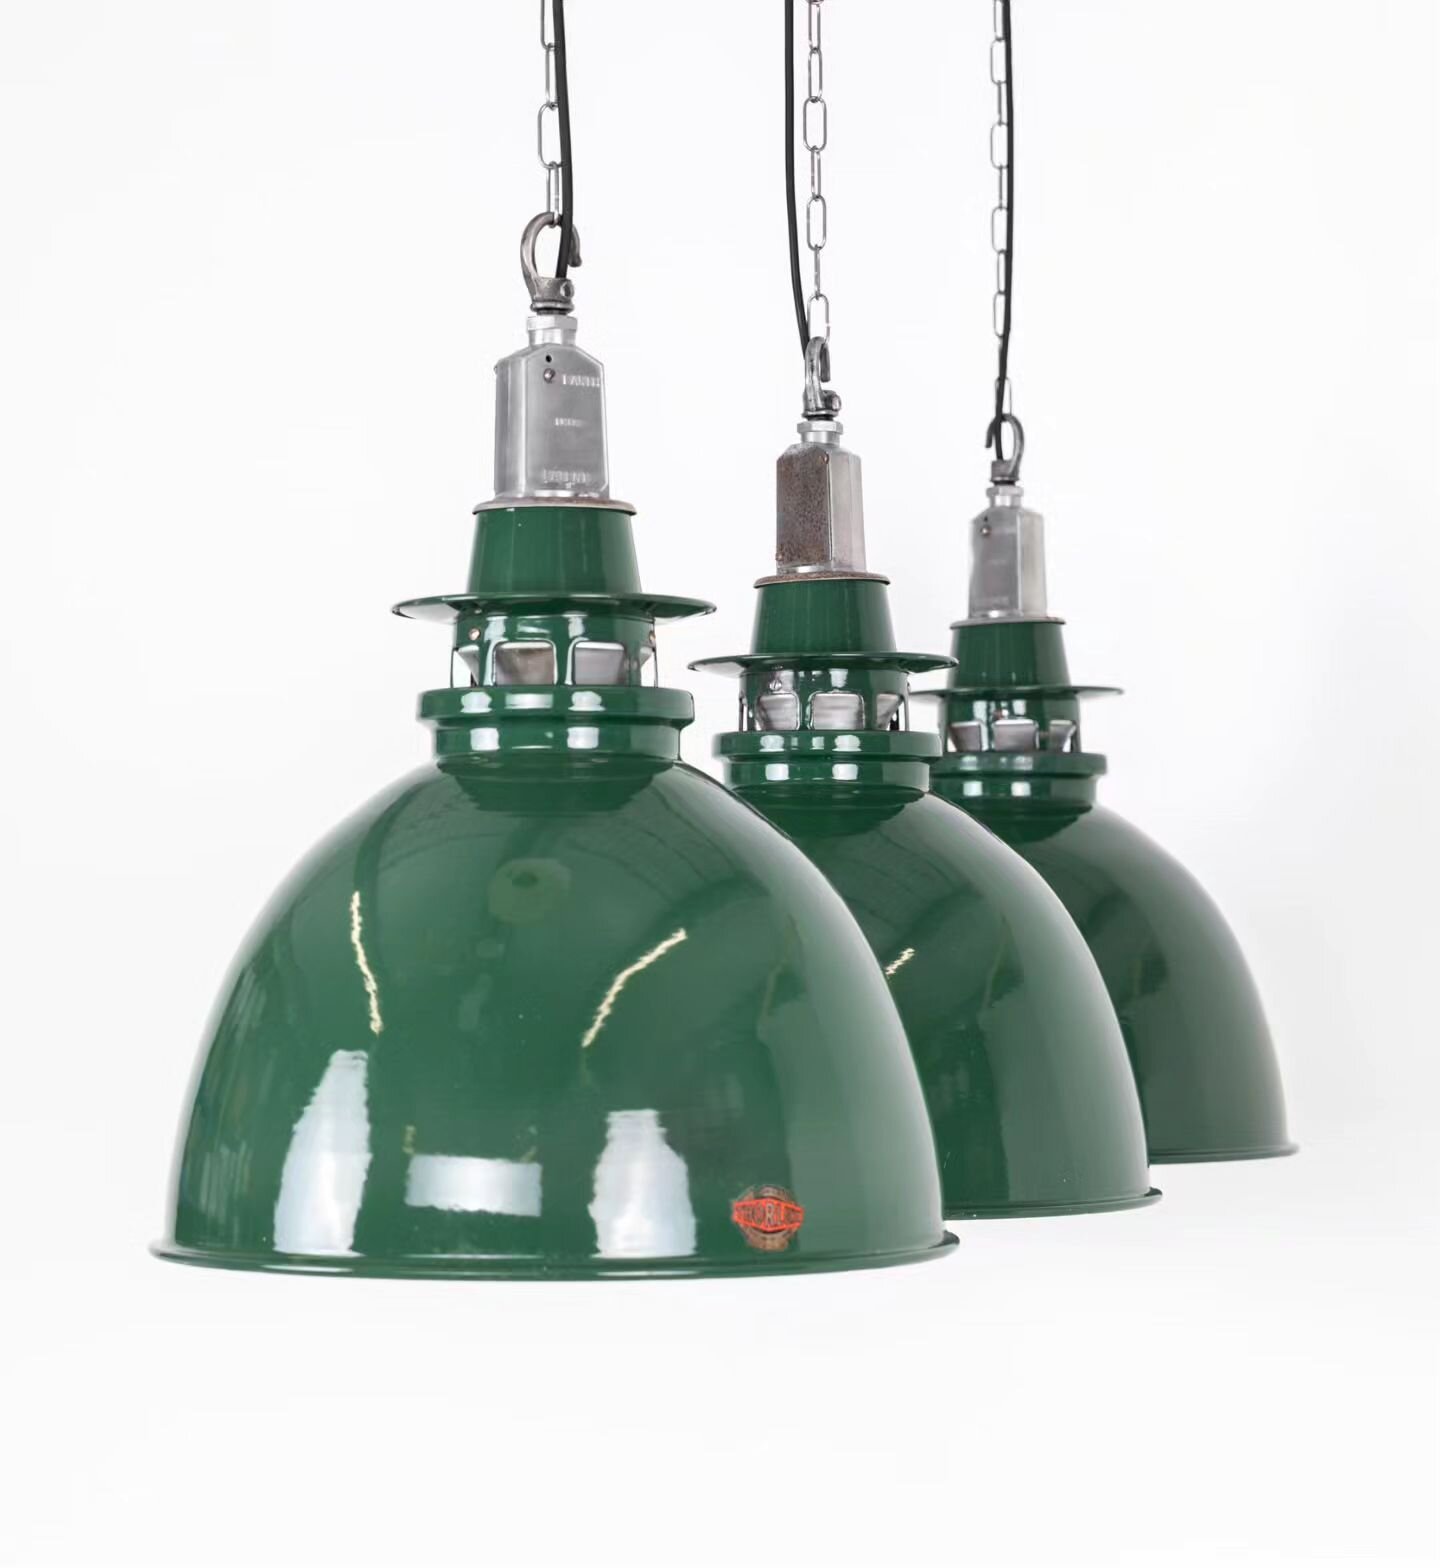 A nice trio of large green vitreous enamelled two-part pendant lights made by Thorlux, circa 1940.

New in and available on the website 👍

#antiquesworkshop #vintageindustrial #antique #vintage #midcentury #antiques #midcenturymodern #interiordesign